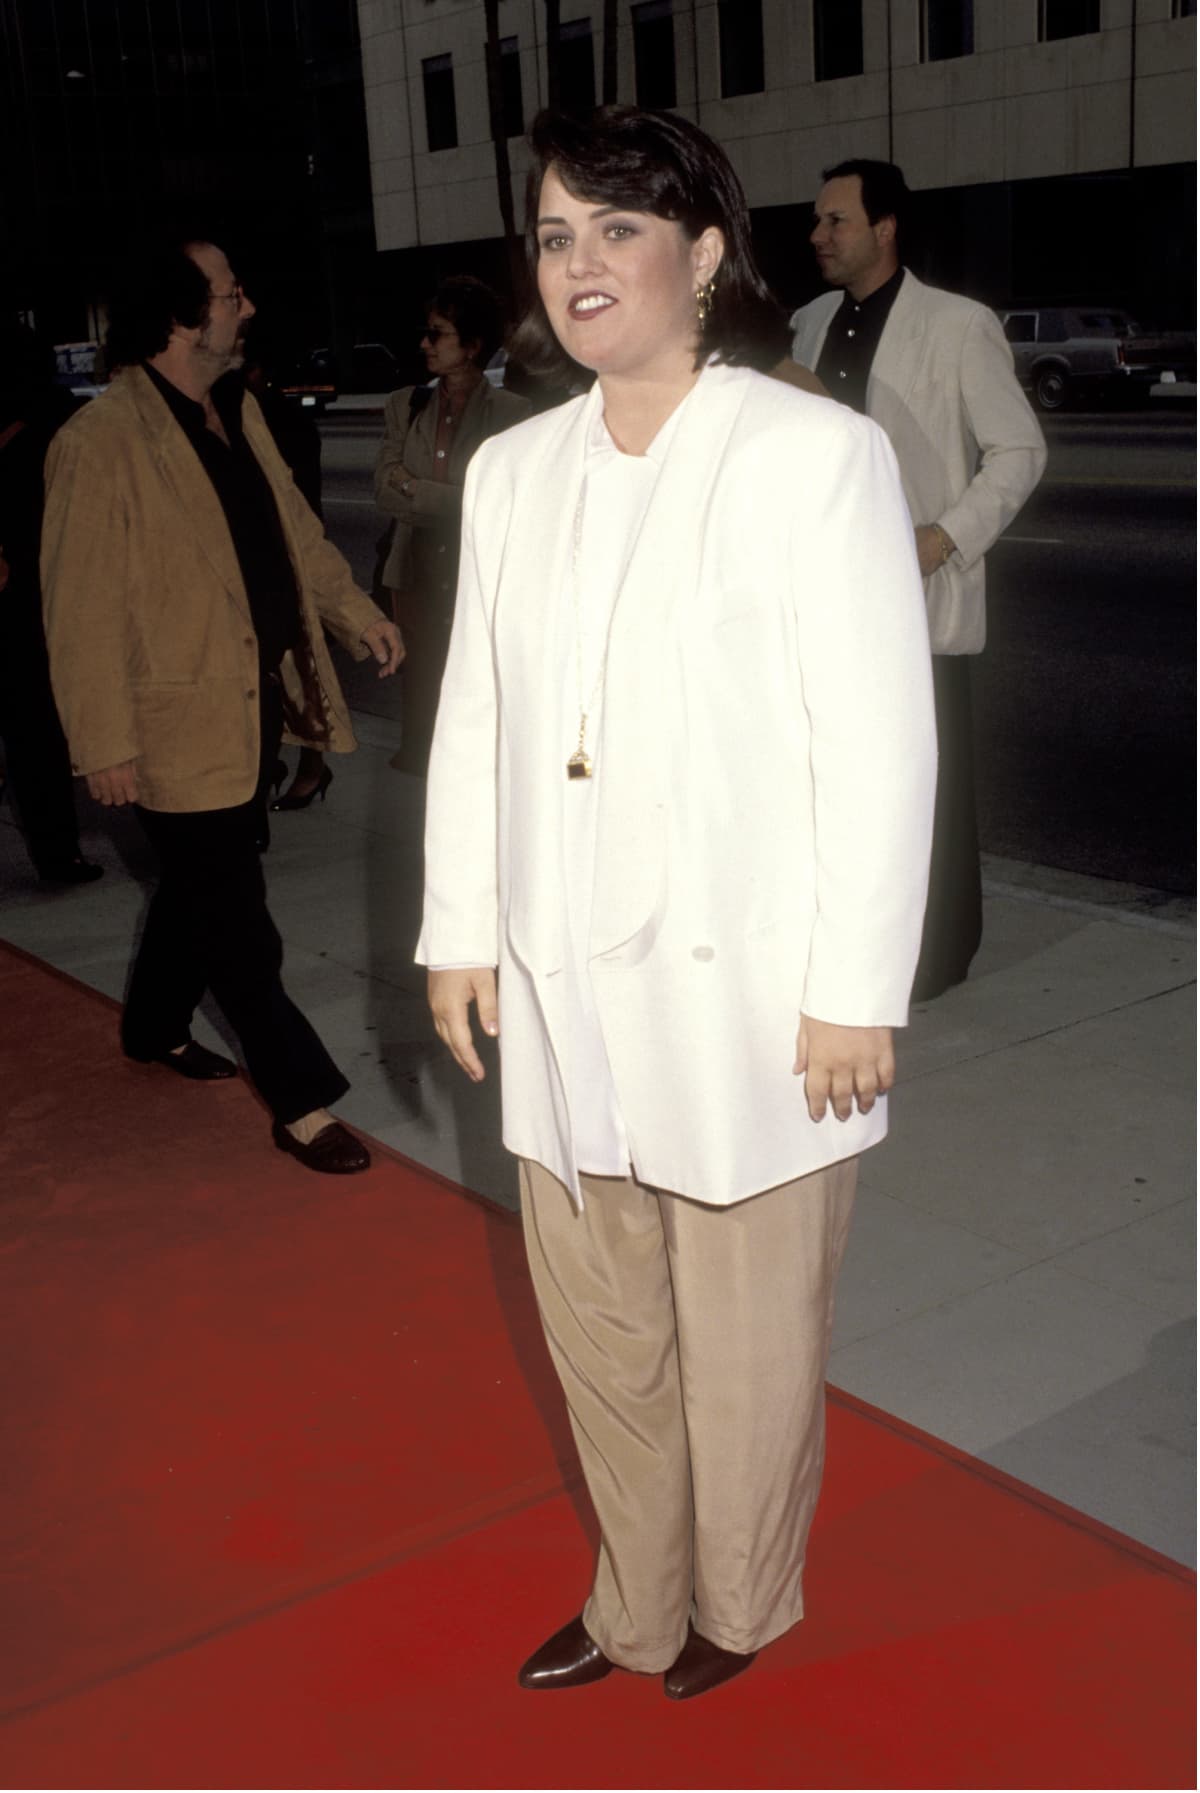 Rosie O'Donnell during "A League of Their Own" Los Angeles Premiere at Academy Theater in Beverly Hills, California, United States. (Photo by Ron Galella/Ron Galella Collection via Getty Images)